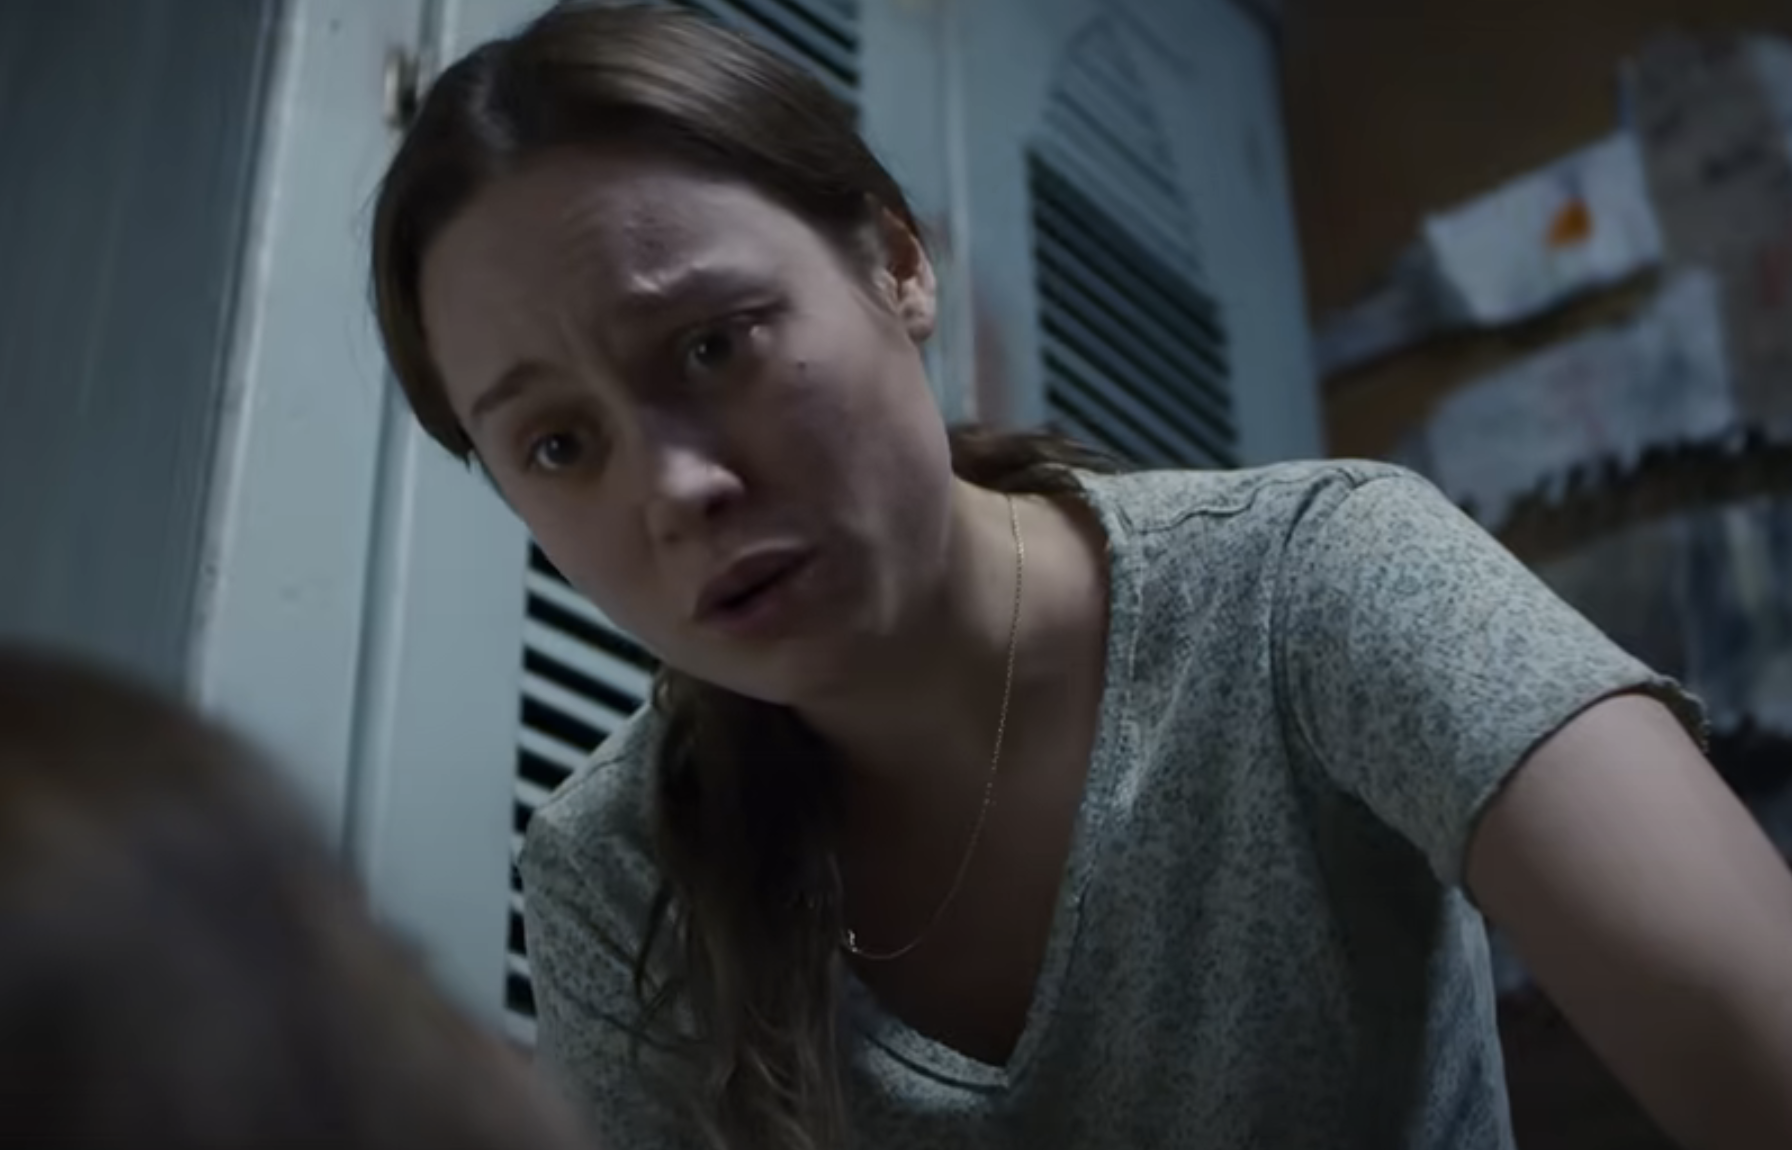 Brie Larson looks concerned while leaning over, wearing a patterned T-shirt and a necklace